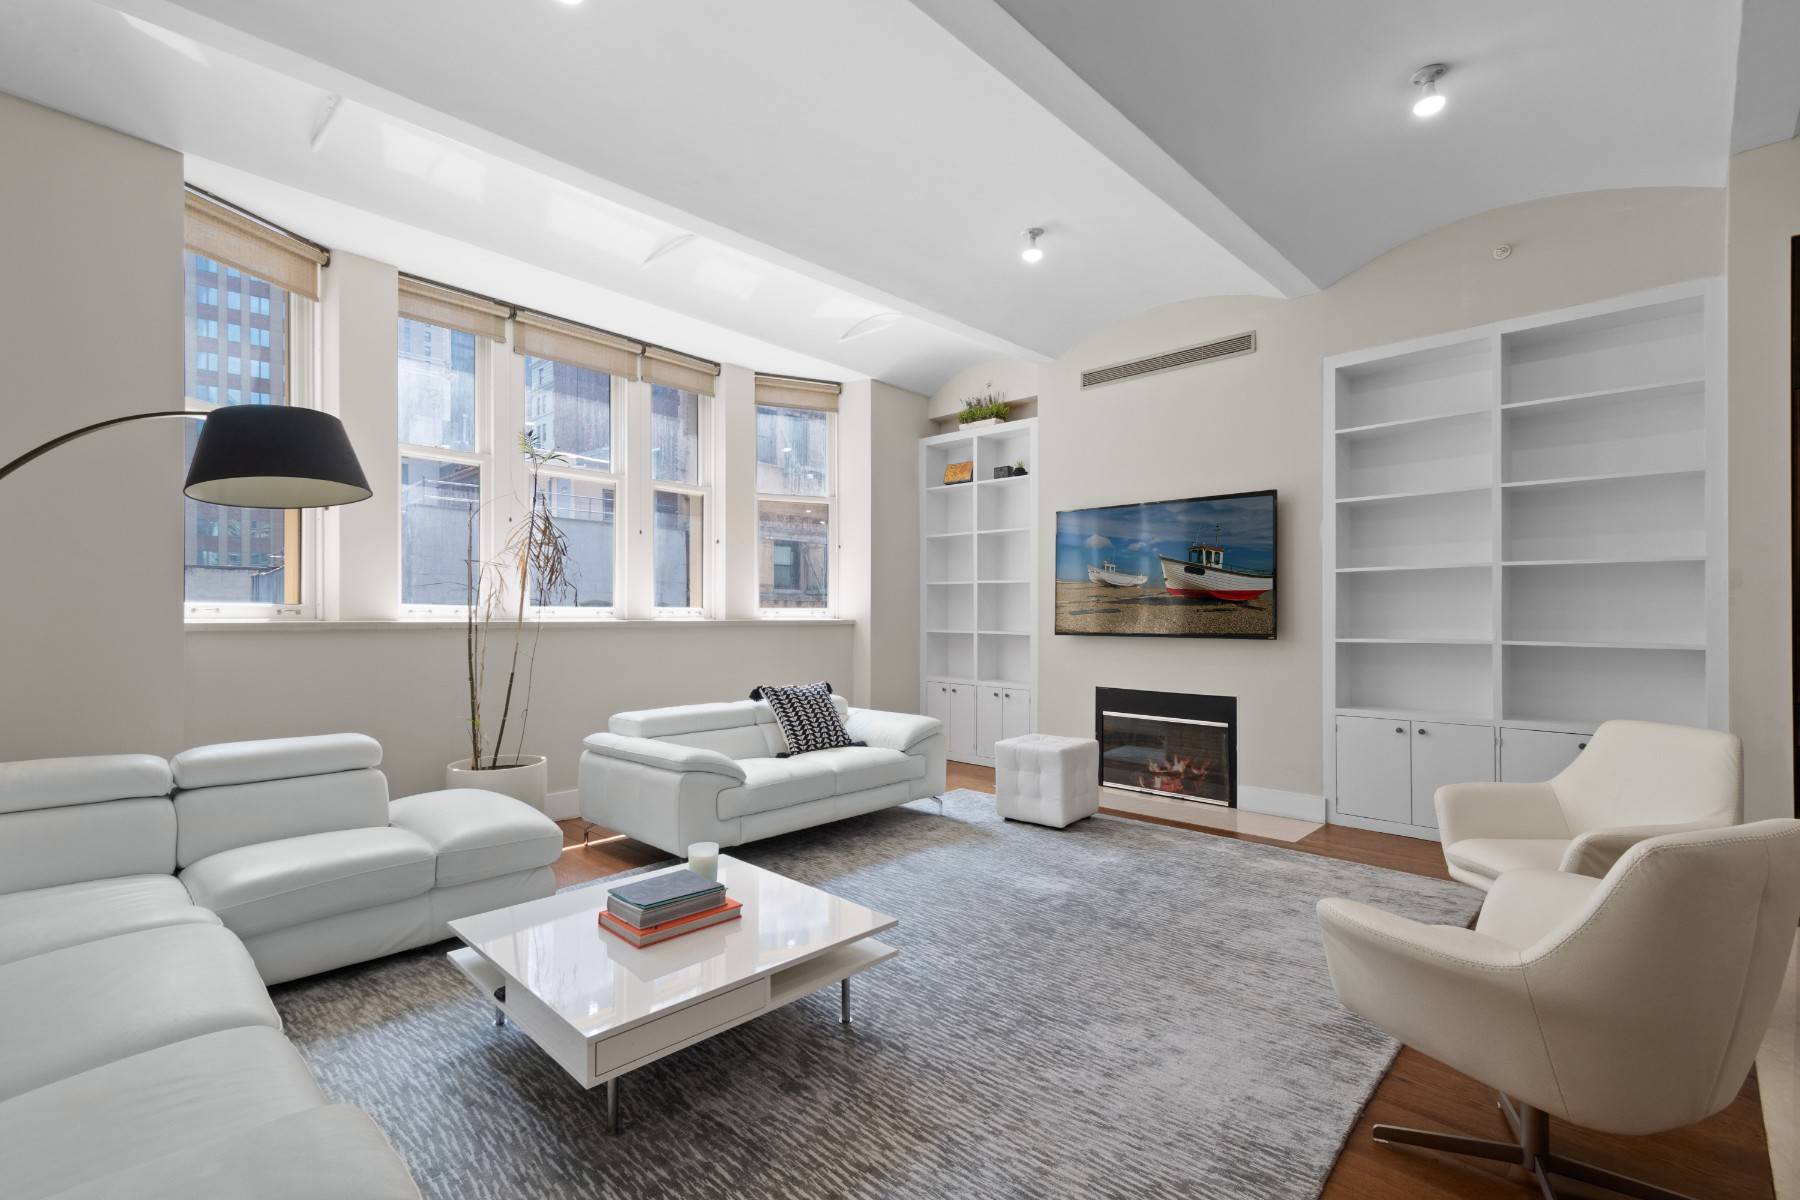 This expansive, flow through 2 bedroom, 3 bathroom loft home is nestled in the border of FiDi and Tribeca.